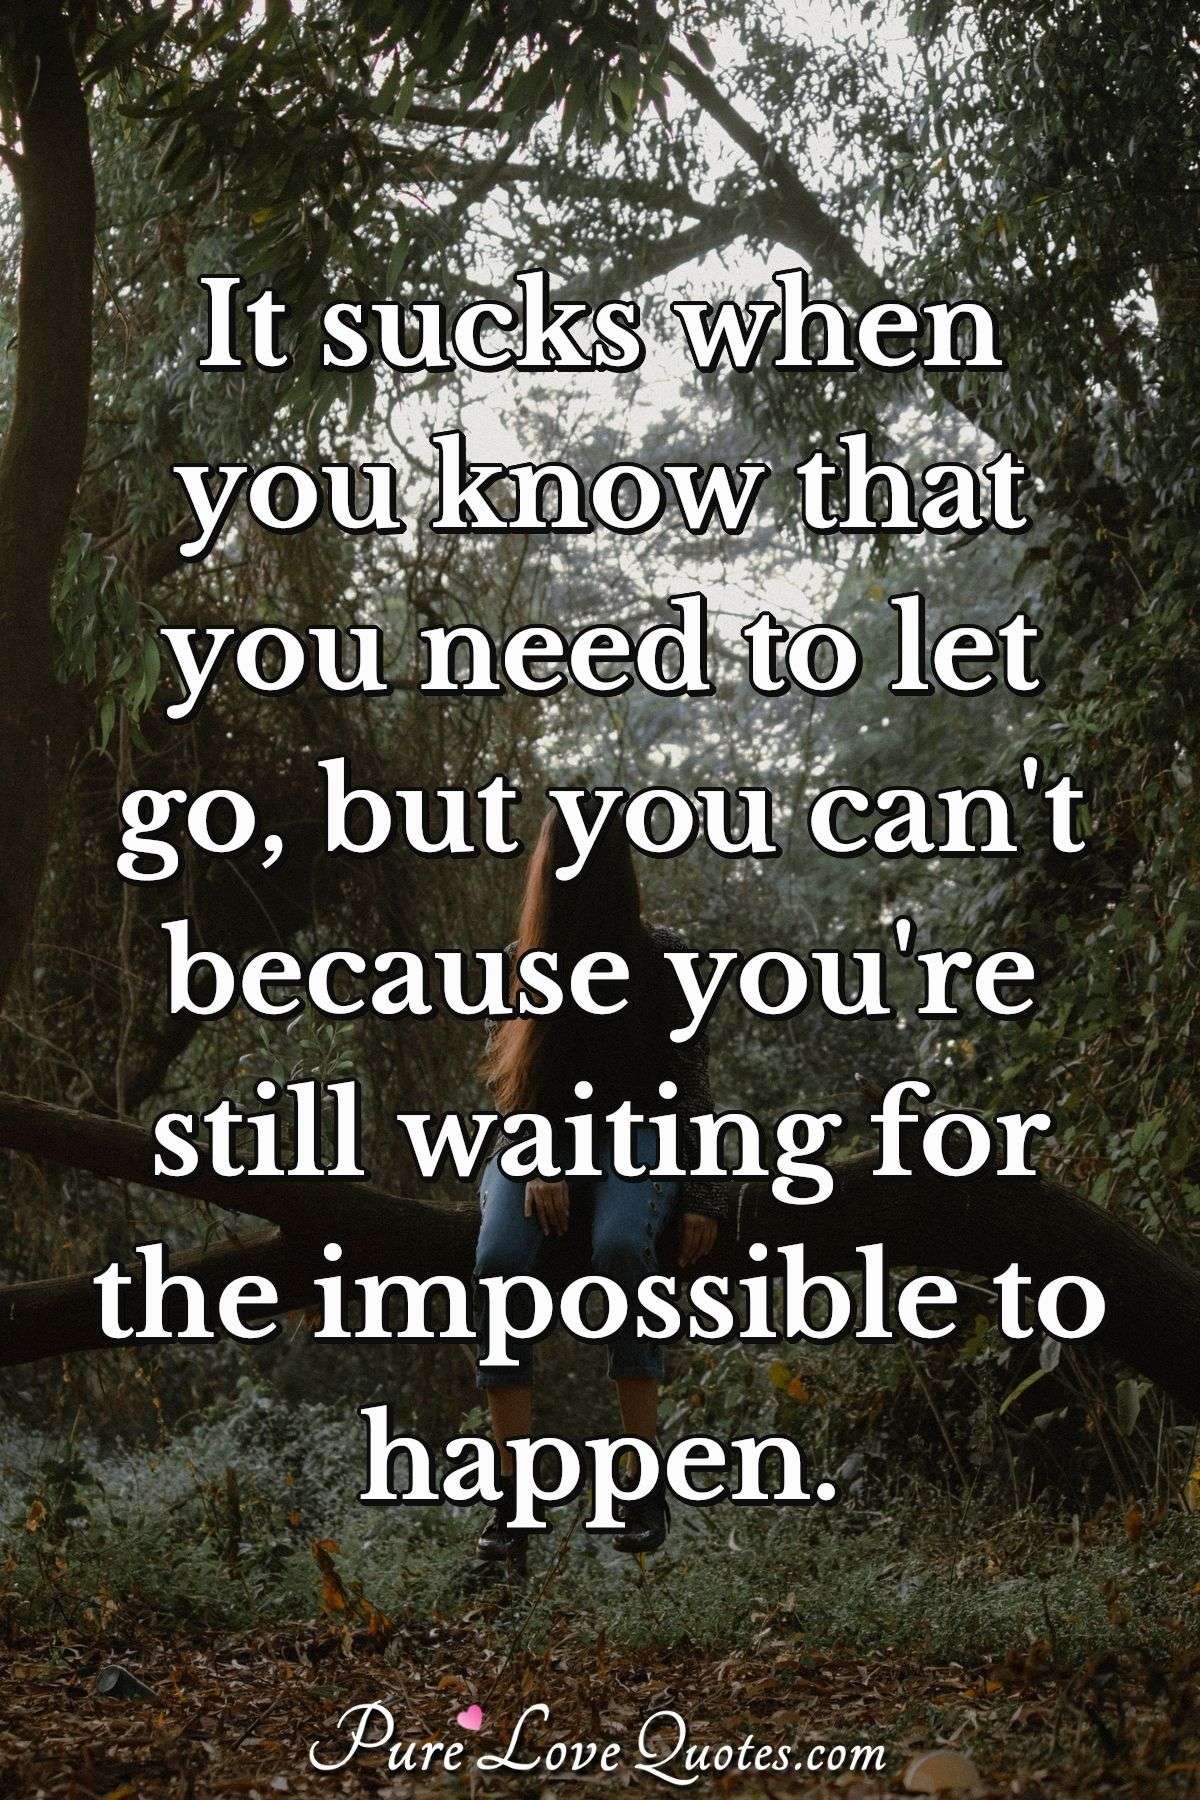 It sucks when you know that you need to let go, but you can't because you're still waiting for the impossible to happen. - Anonymous